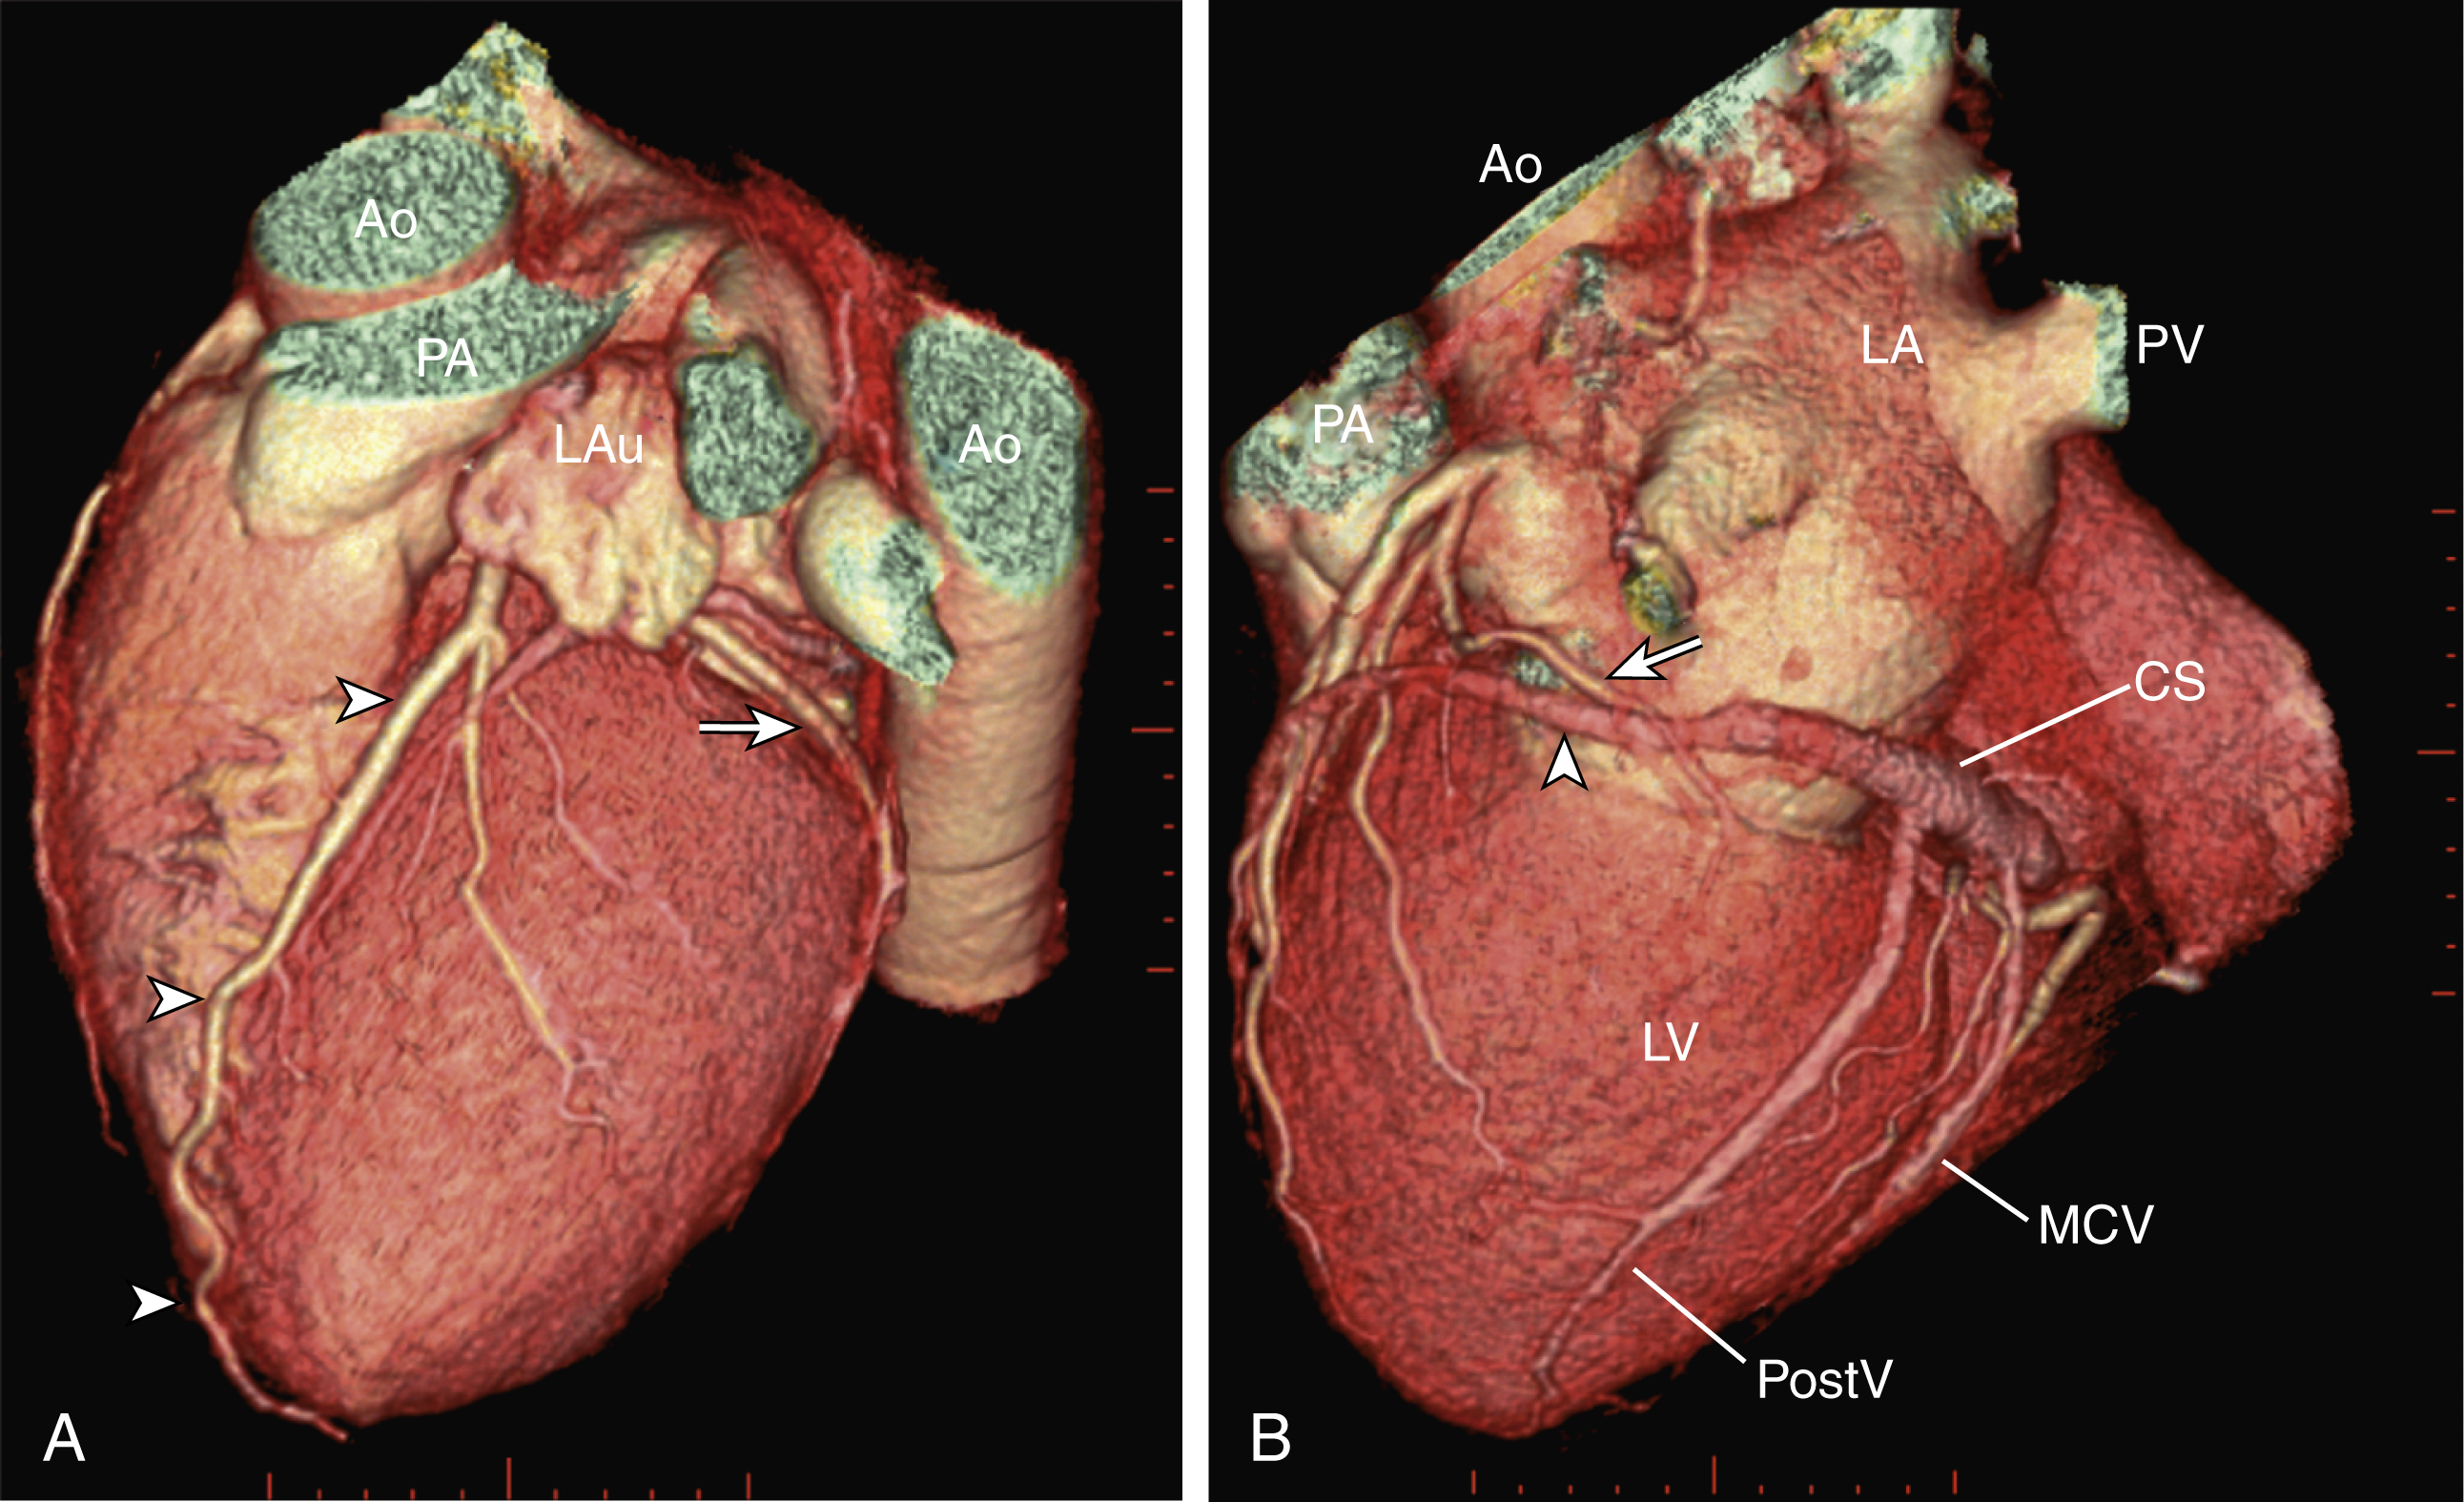 Fig. 50.3, (A) Three-dimensional (3D) volume-rendered computed tomography (CT) coronary angiography image showing branches of left coronary artery, left anterior descending artery ( three horizontal white arrowheads on left ), and left circumflex artery ( arrow ). (B) 3D volume-rendered CT coronary angiography image showing course of left circumflex artery ( long horizontal arrow ) and great cardiac vein ( vertical arrowhead ), which continues on as coronary sinus ( CS ). CS receives tributaries from posterior vein ( PostV ) of left ventricle and middle cardiac vein ( MCV ). Ao, Aorta; LA, left atrium; LAu, left auricle; PA, pulmonary artery; PV, pulmonary vein.